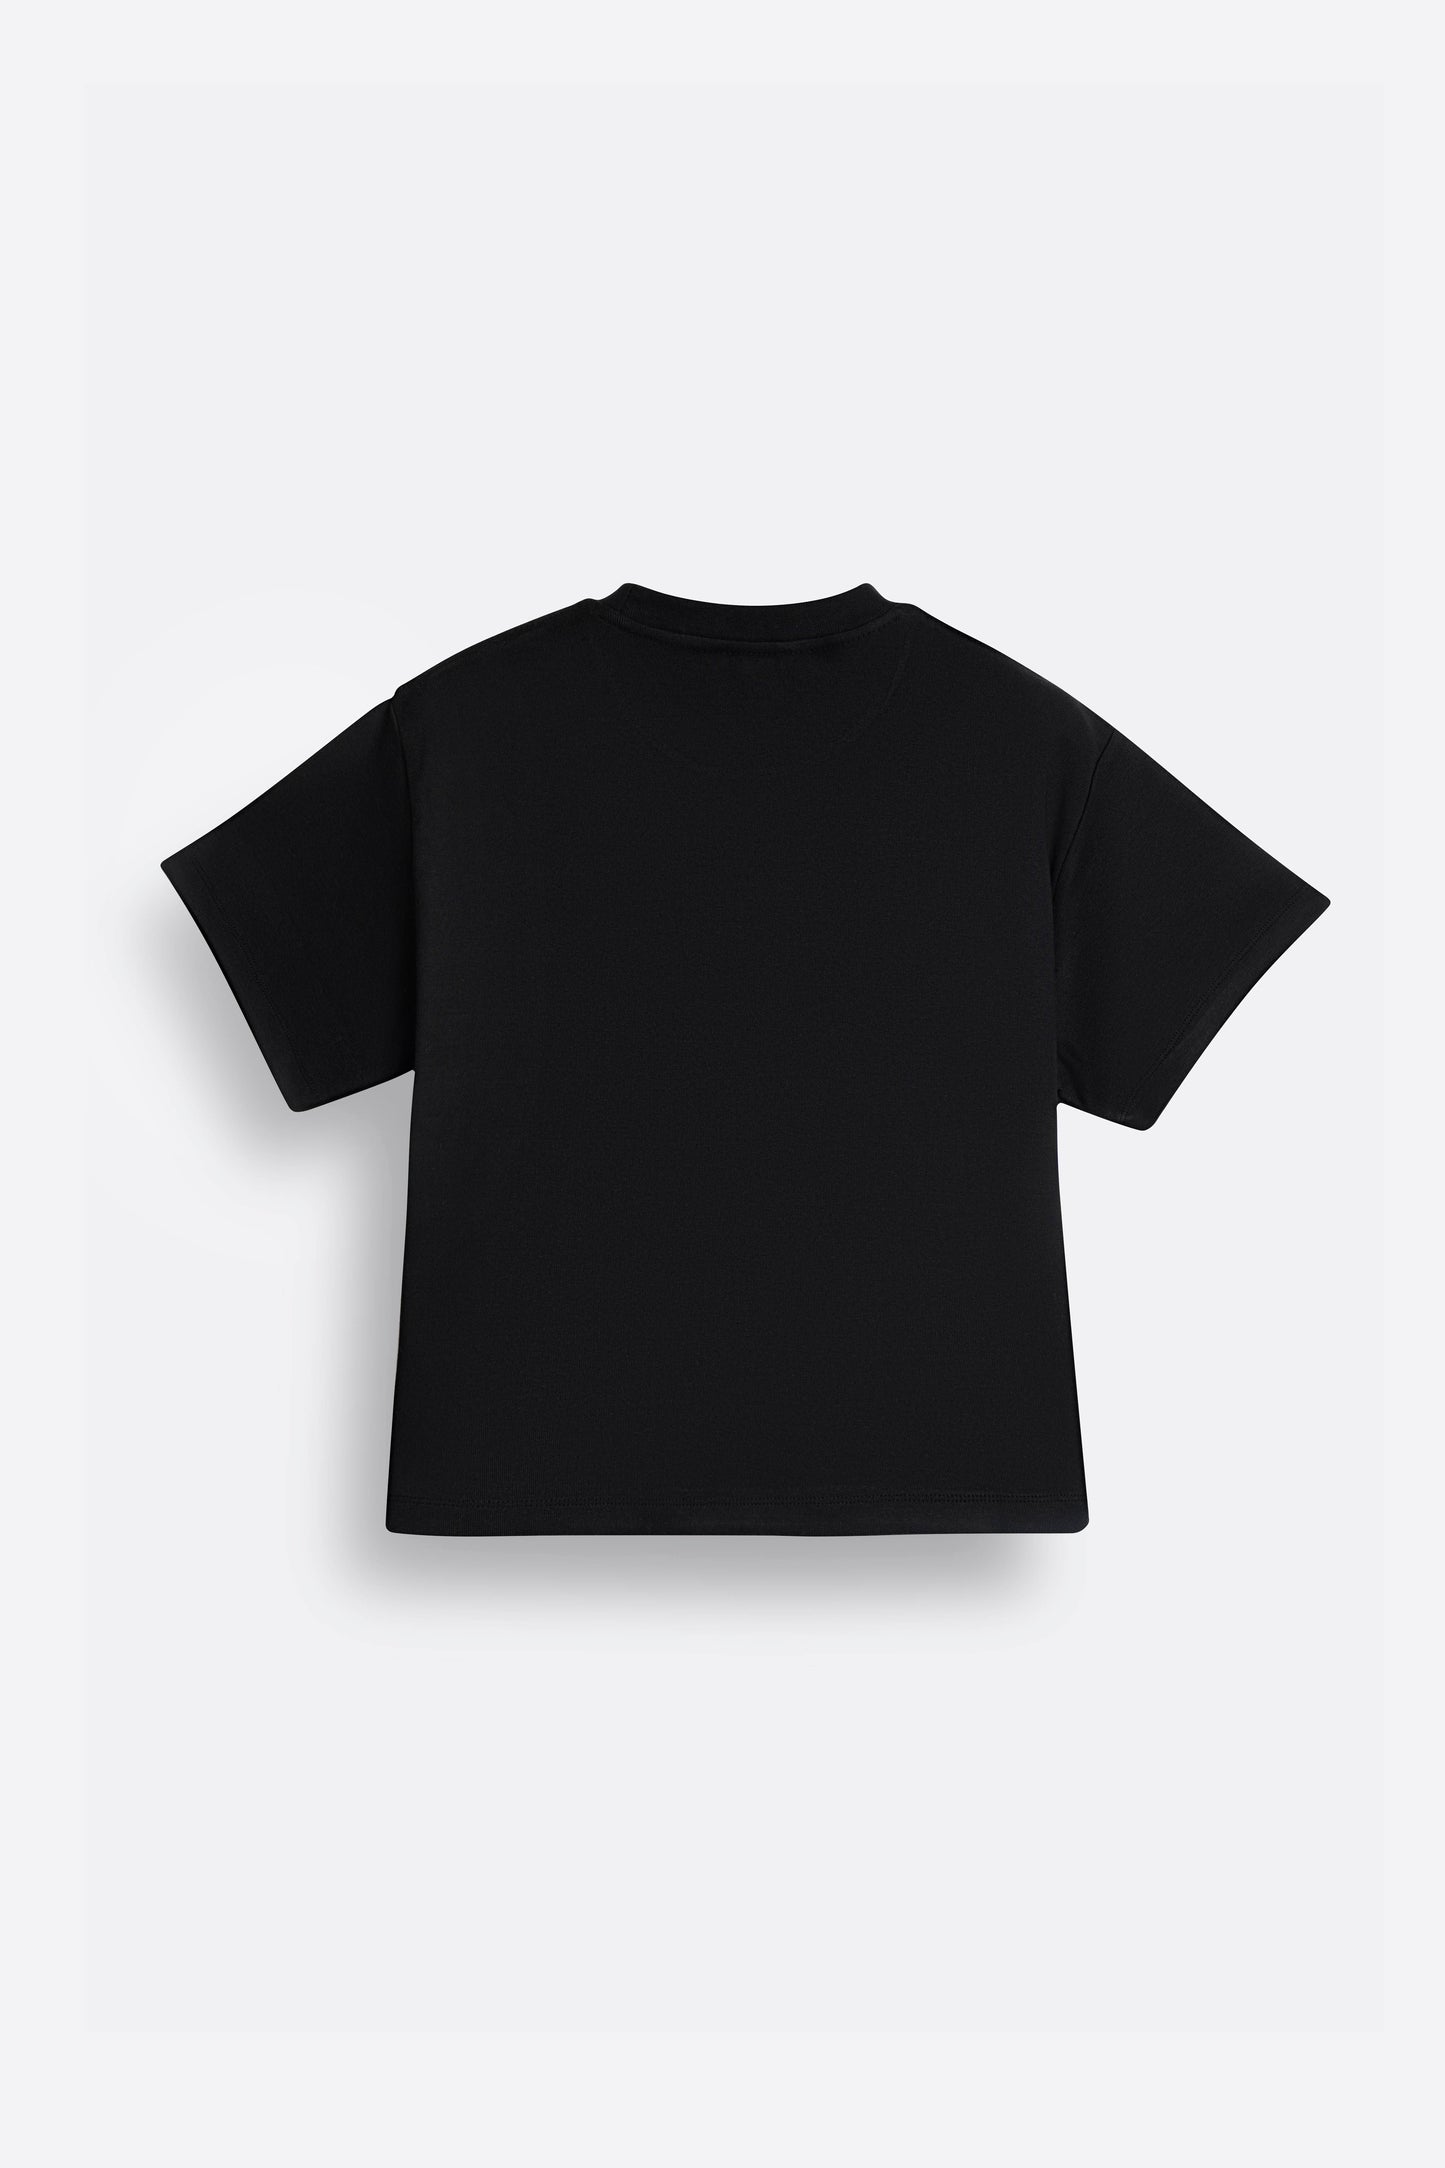 Boxy Tee in Ink Black